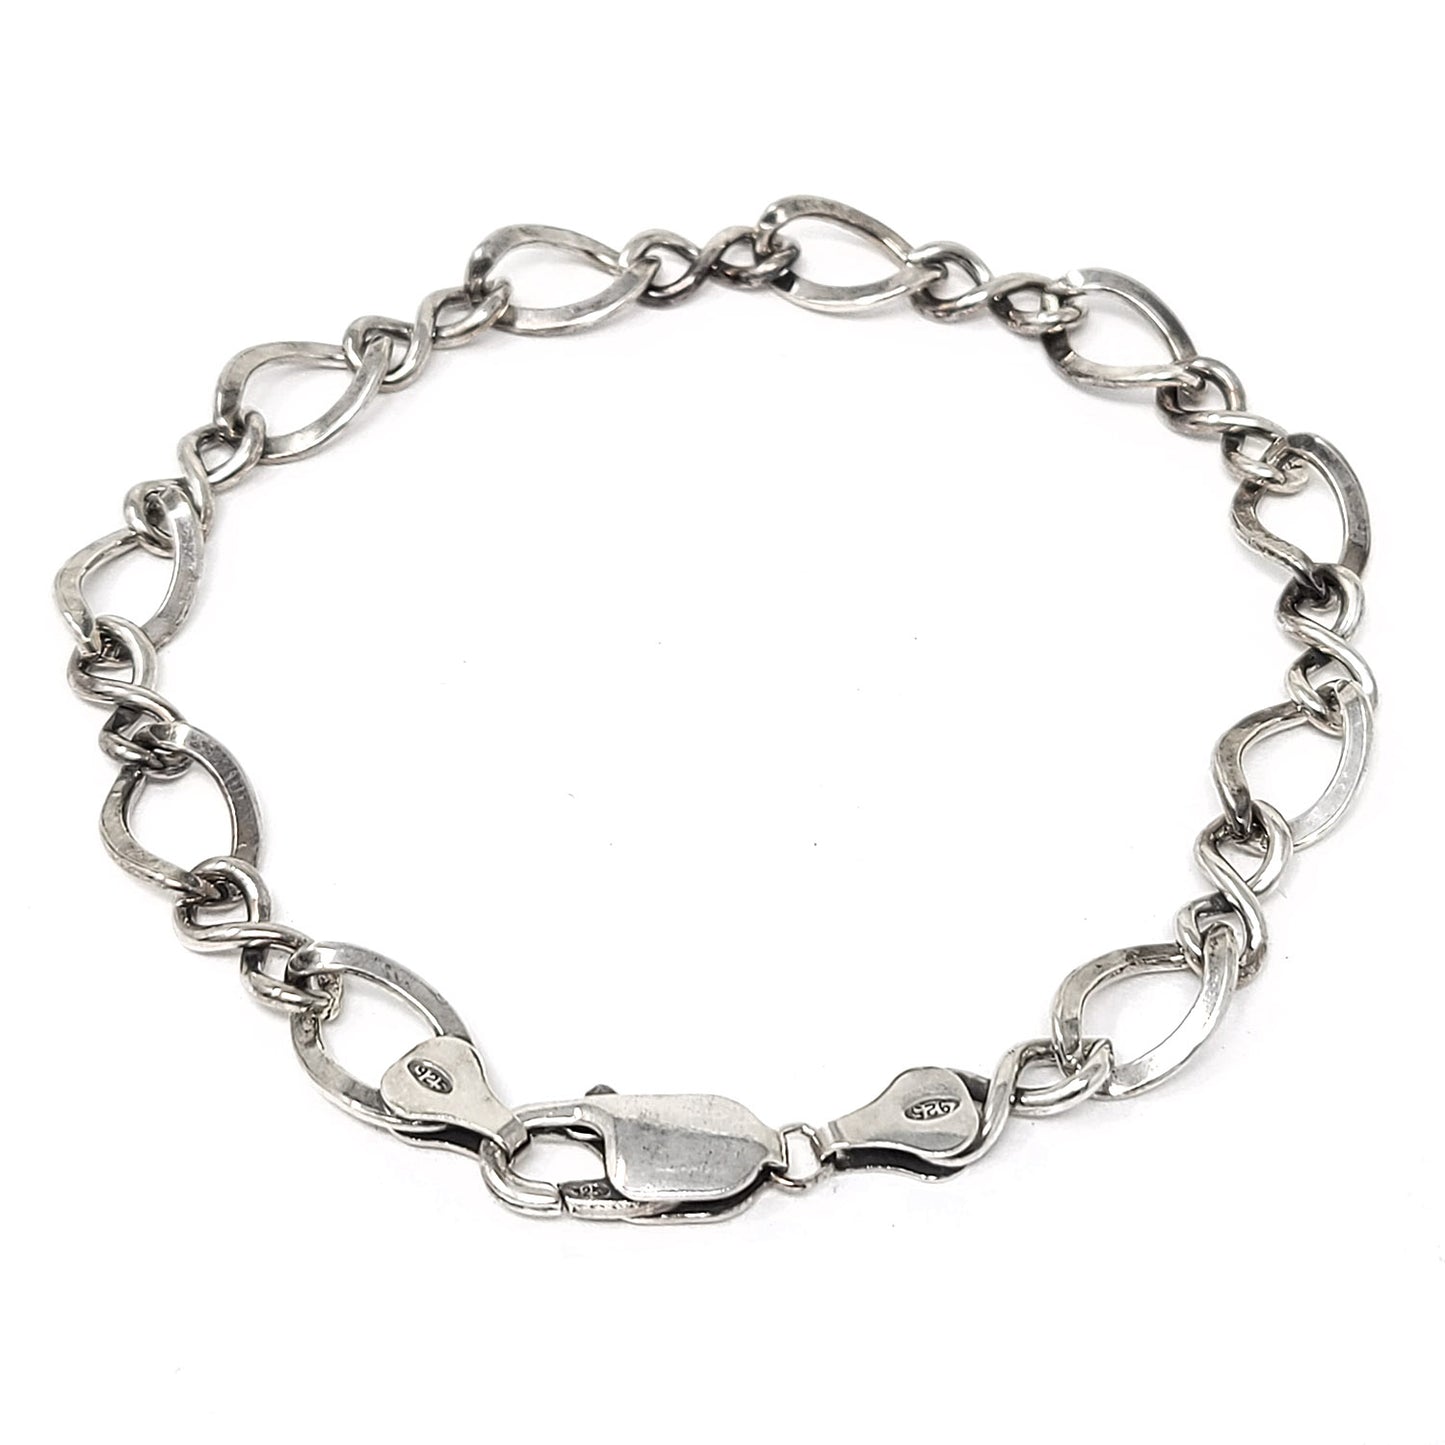 925 Sterling Silver 9 Inch Oxidized Large Figure 8 Chain Bracelet with Lobster Clasp